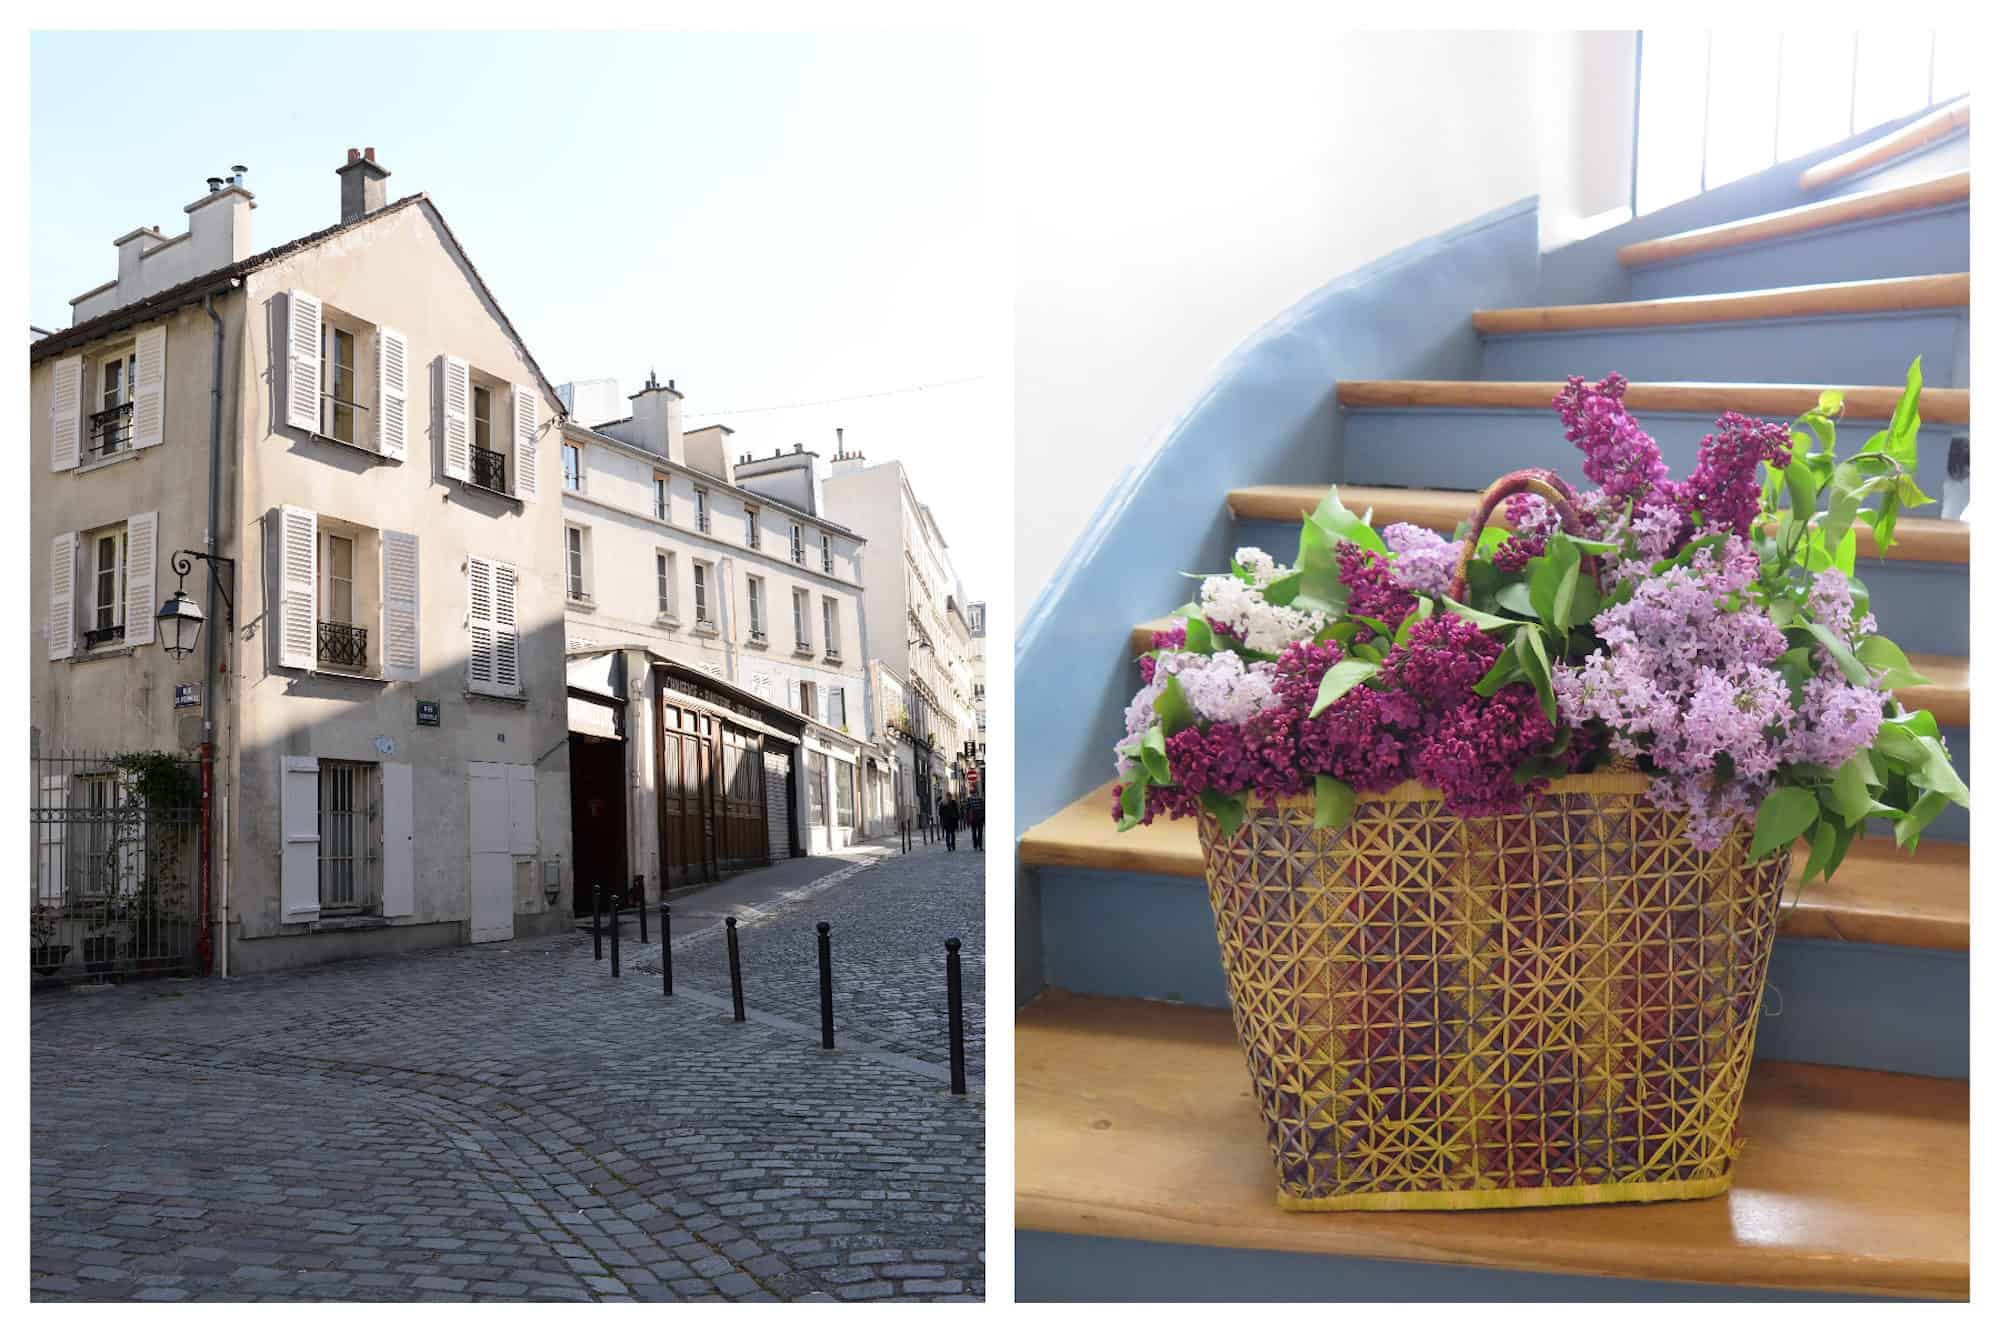 An old house on a cobblestone street in Montmartre in Paris, near the wall of I love yous (left). A basket of beautiful fuchsia and lilac flowers set on a wooden staircase inside a Parisian apartment building (right).